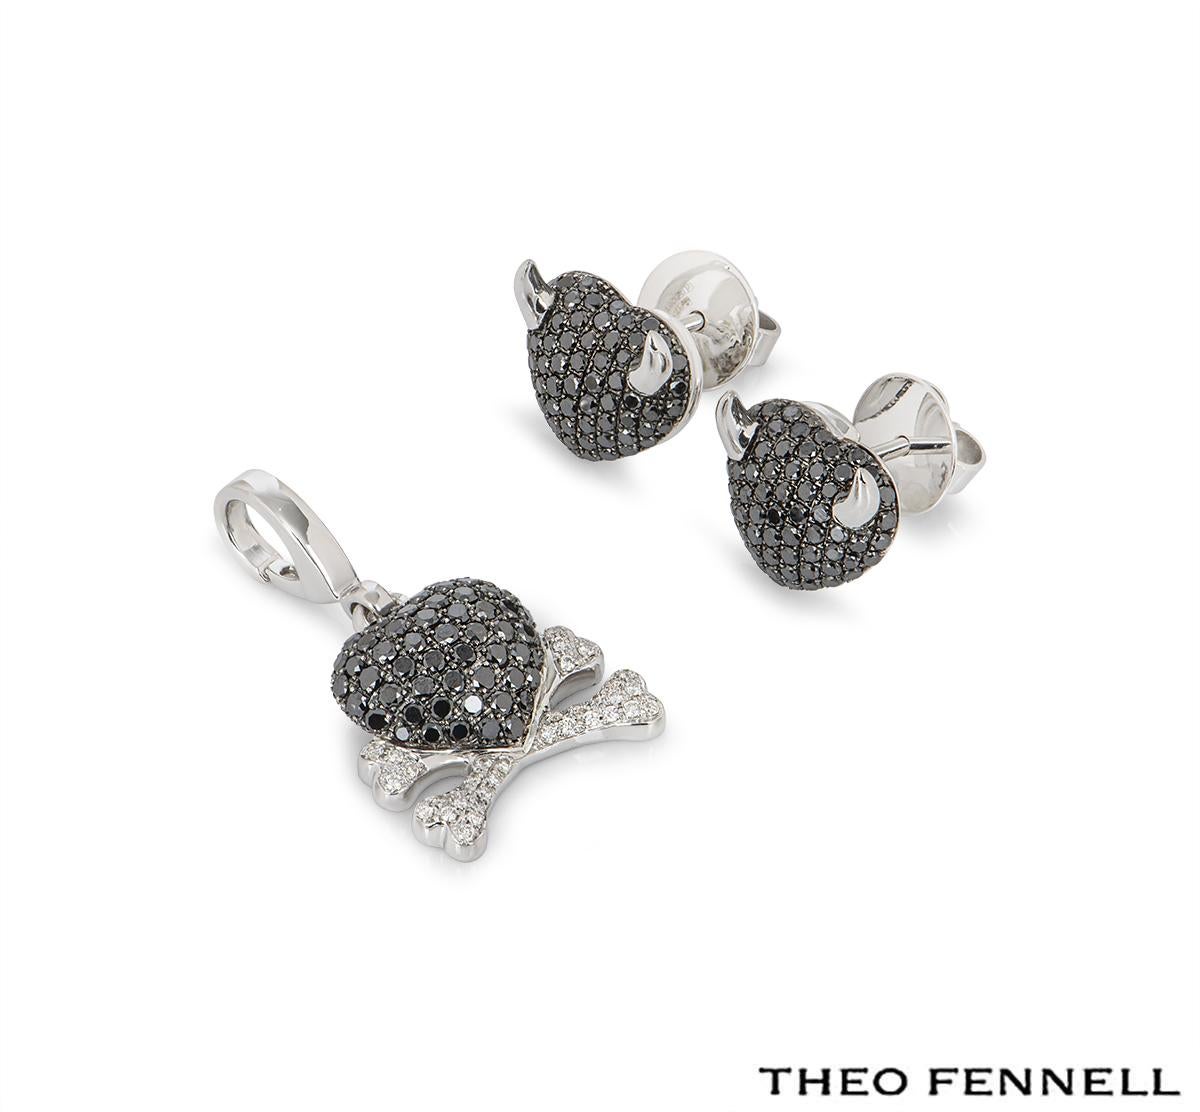 An 18k white gold Theo Fennell black and white diamond jewellery suite. The jewellery suite comprises of a charm and a pair of earrings. The charm features a heart and crossbones motif pave set with black and white round brilliant cut diamonds. The